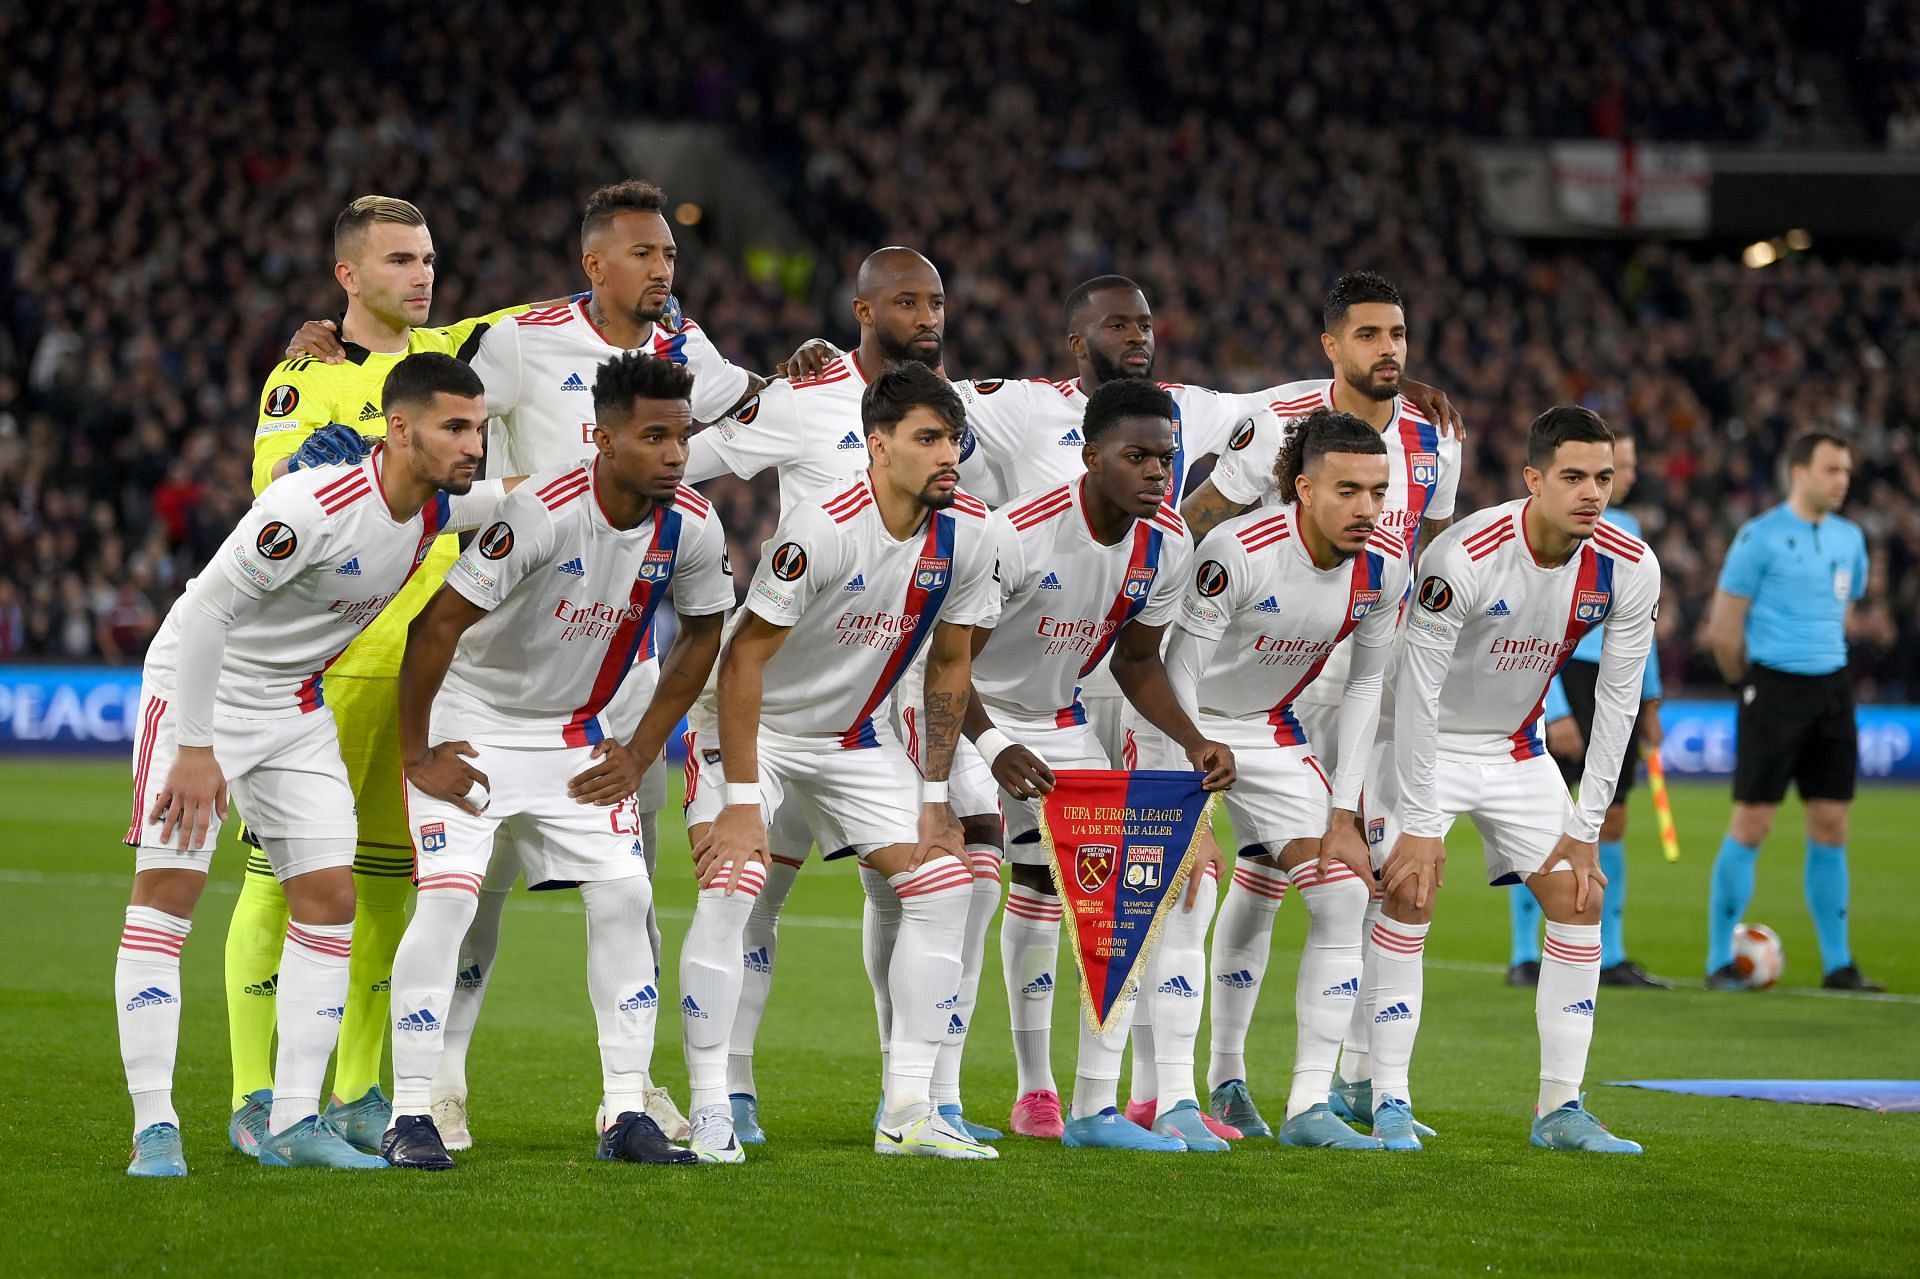 Olympique Lyon will face Metz on Sunday - Ligue 1